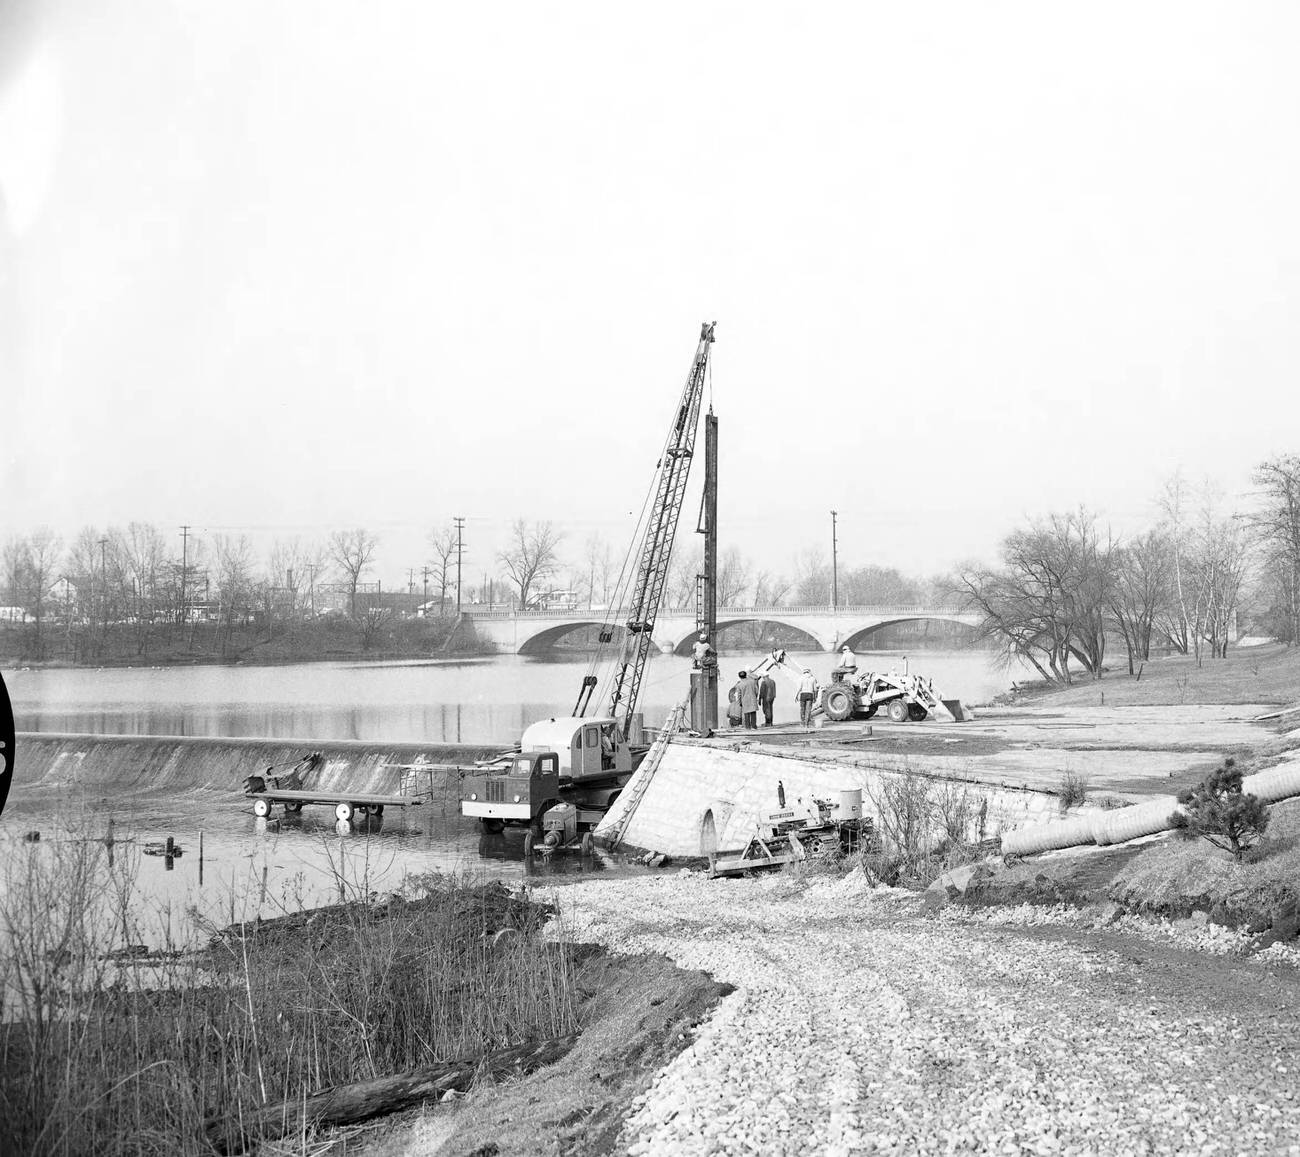 Construction views of the Fifth Avenue Dam over the Olentangy River, 1964.